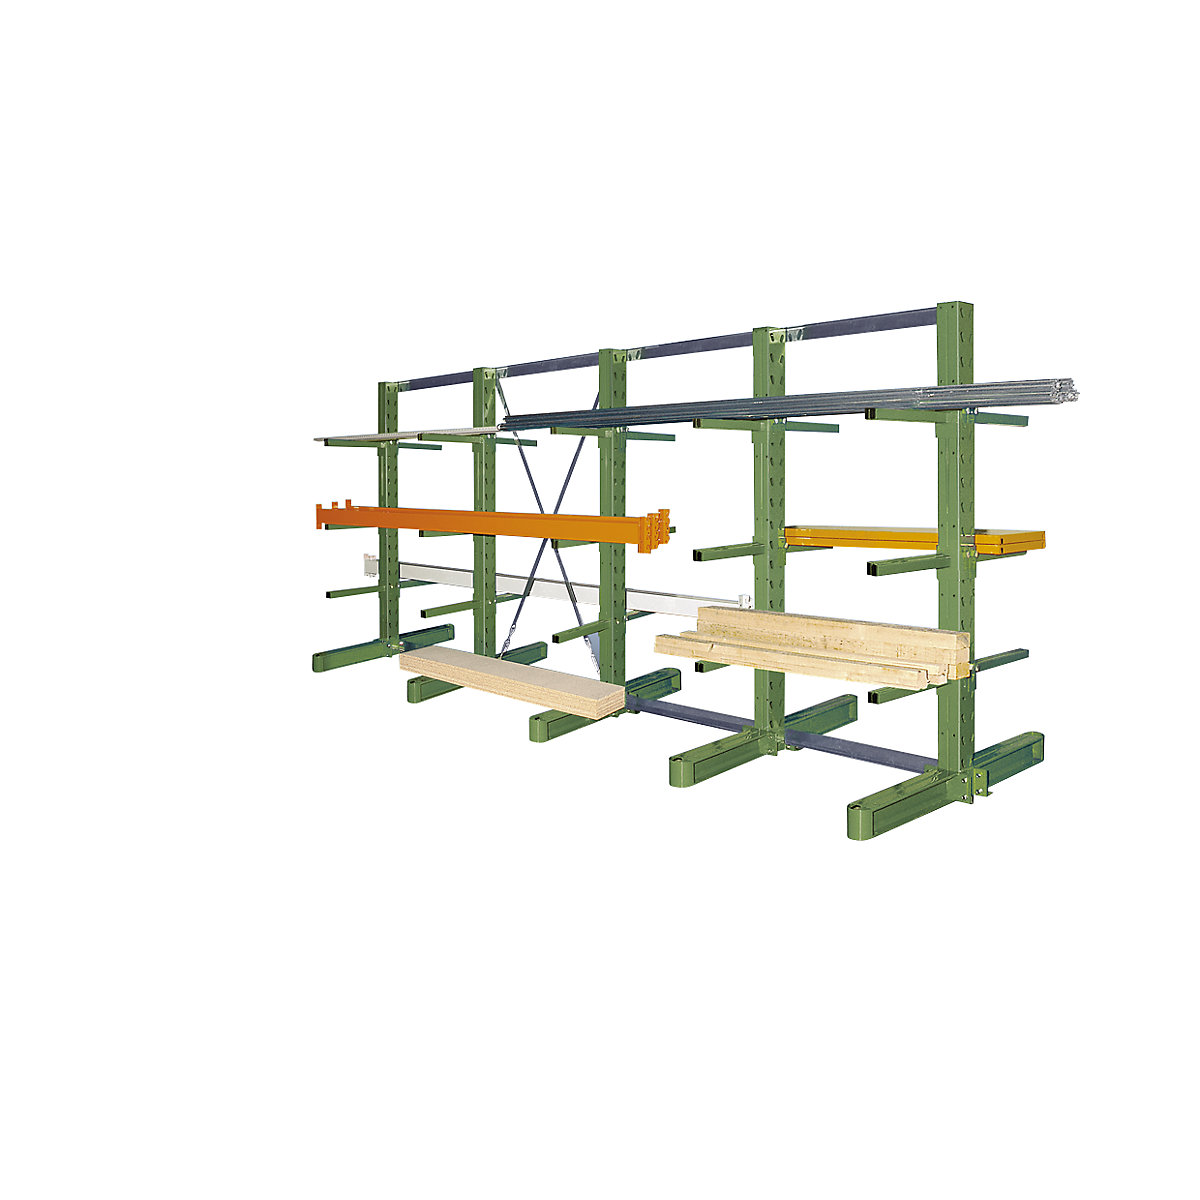 Complete cantilever racking unit, double sided – eurokraft pro, upright height 2100 mm, length 4100 mm, depth 2 x 400 mm, green-1